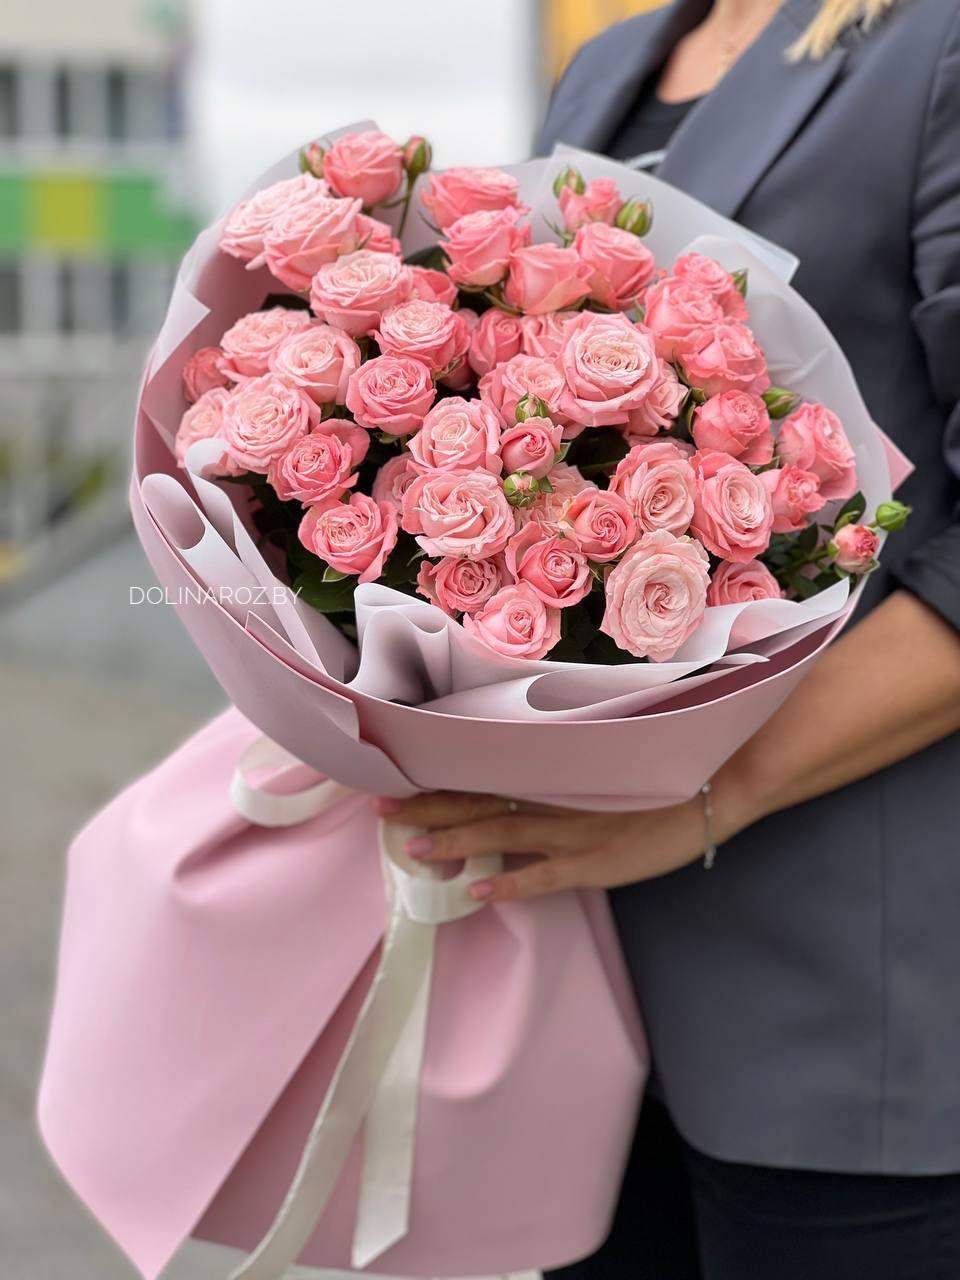 Bouquet of flowers "Important day"